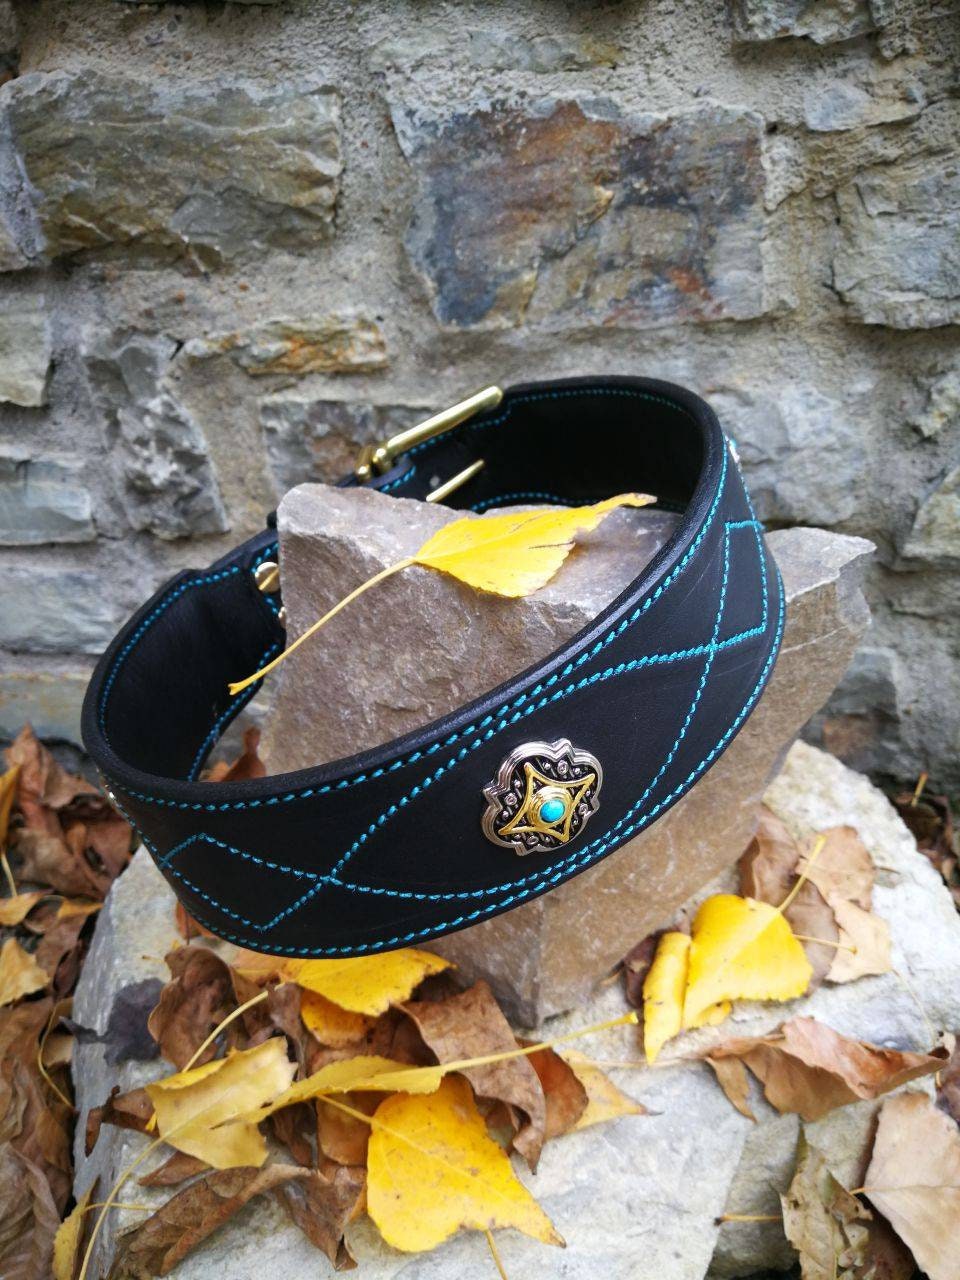 Luxury Turquoise Stitched Black Leather Dog Collar, Decorated faux Turquoise Stones Conchos,wide leather collar for dog, exclusive collar